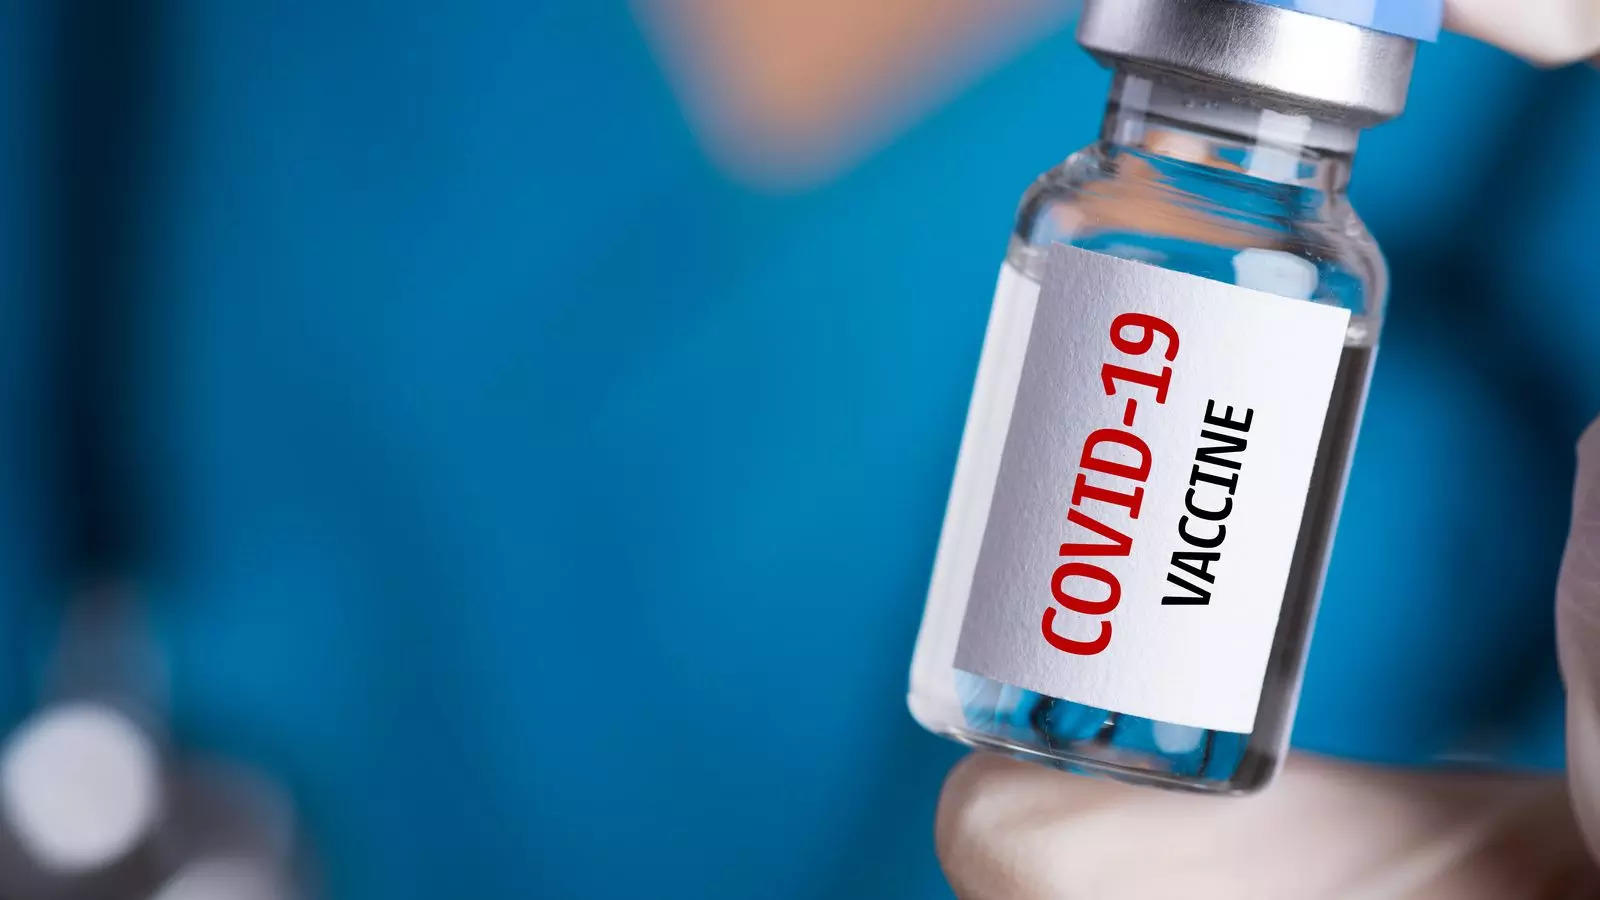 Fourth Covid vaccine dose unwarranted right now but increased surveillance needed: experts